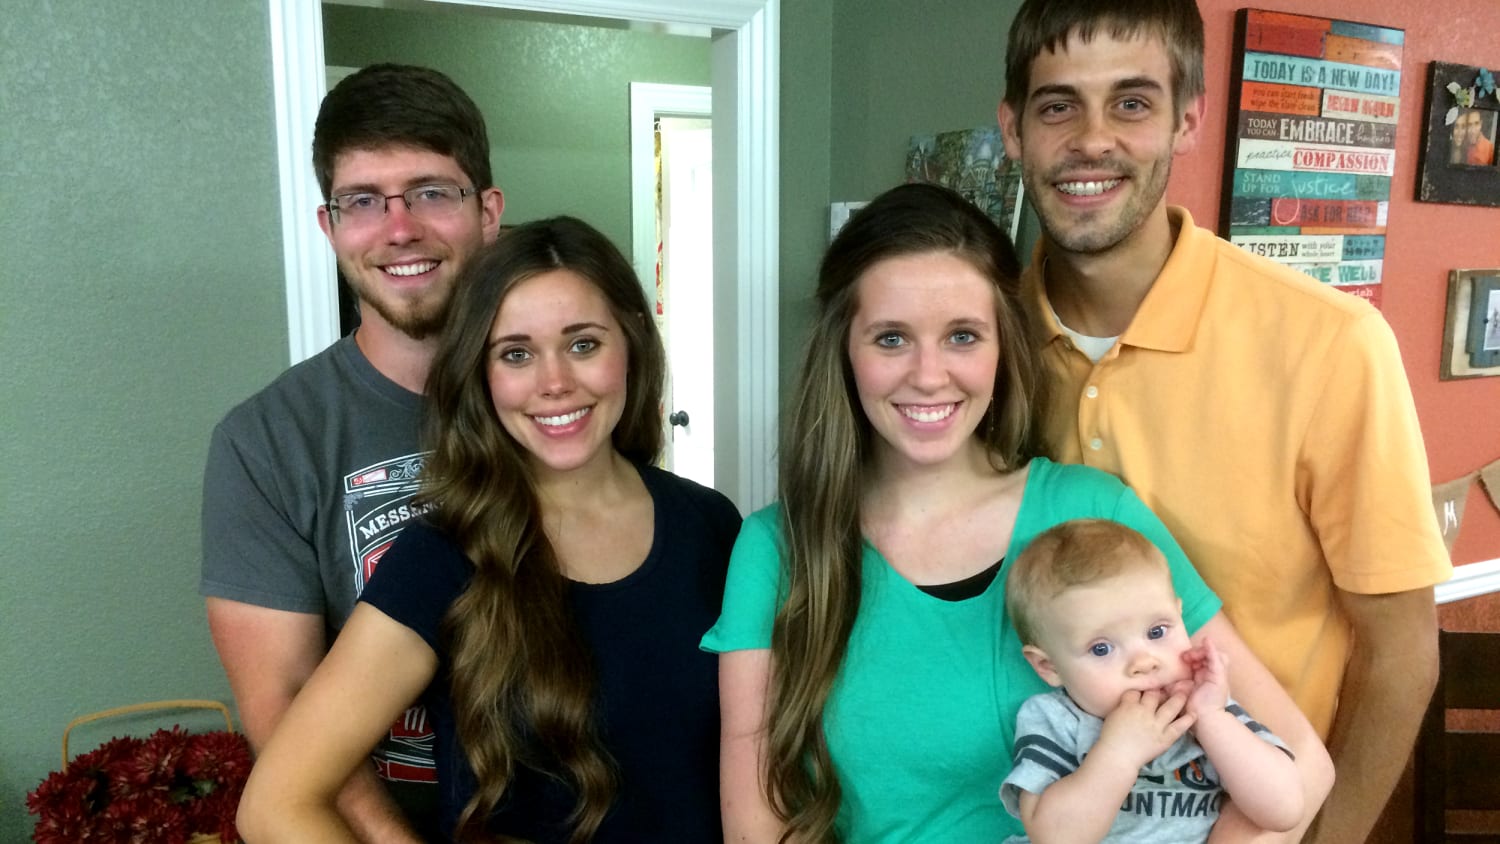 The Duggars Return To Tlc New Specials Center On Daughters Jill And Jessa